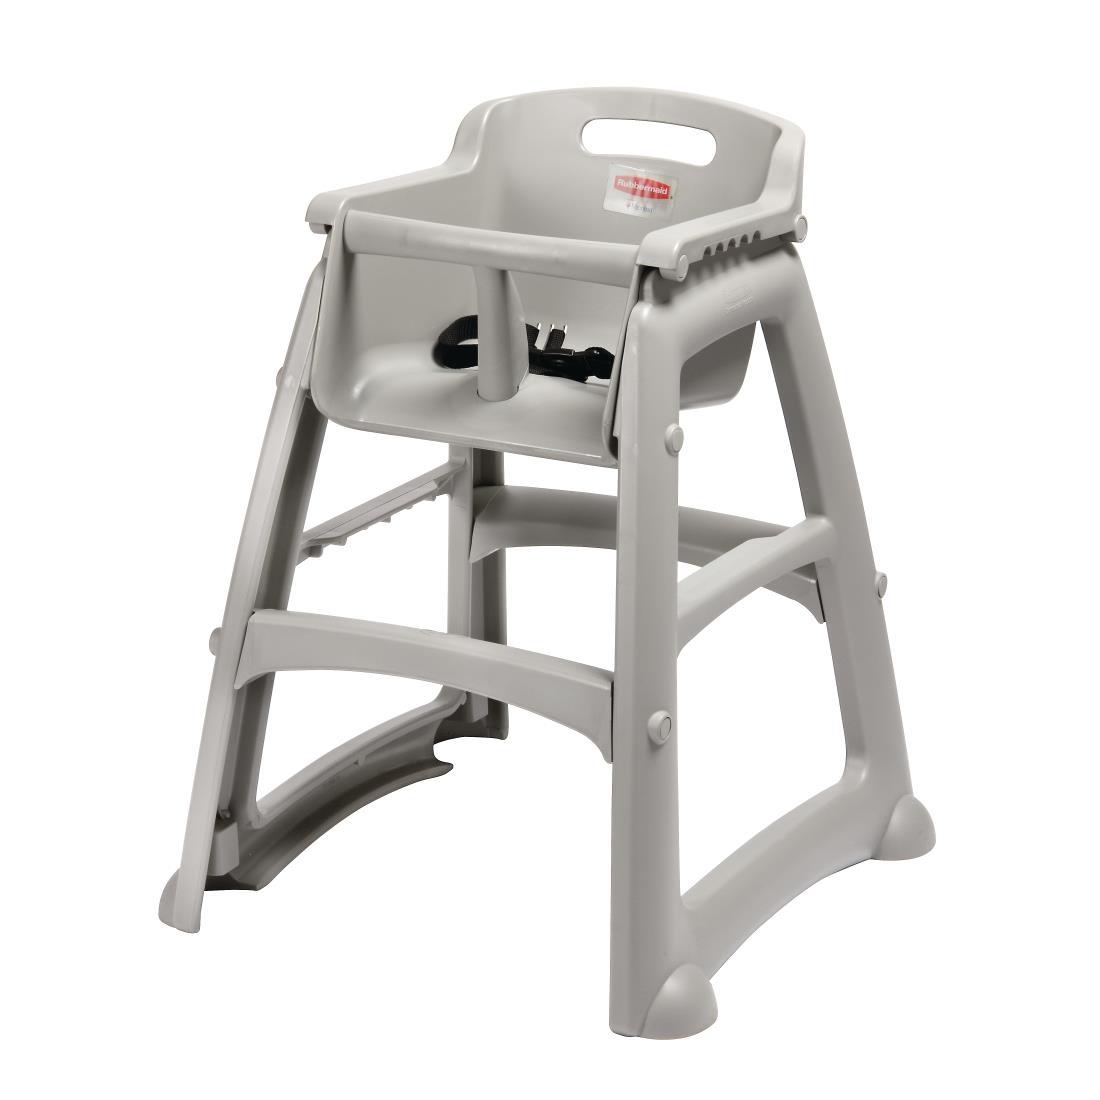 Rubbermaid Sturdy Stacking High Chair Platinum - M959  - 3